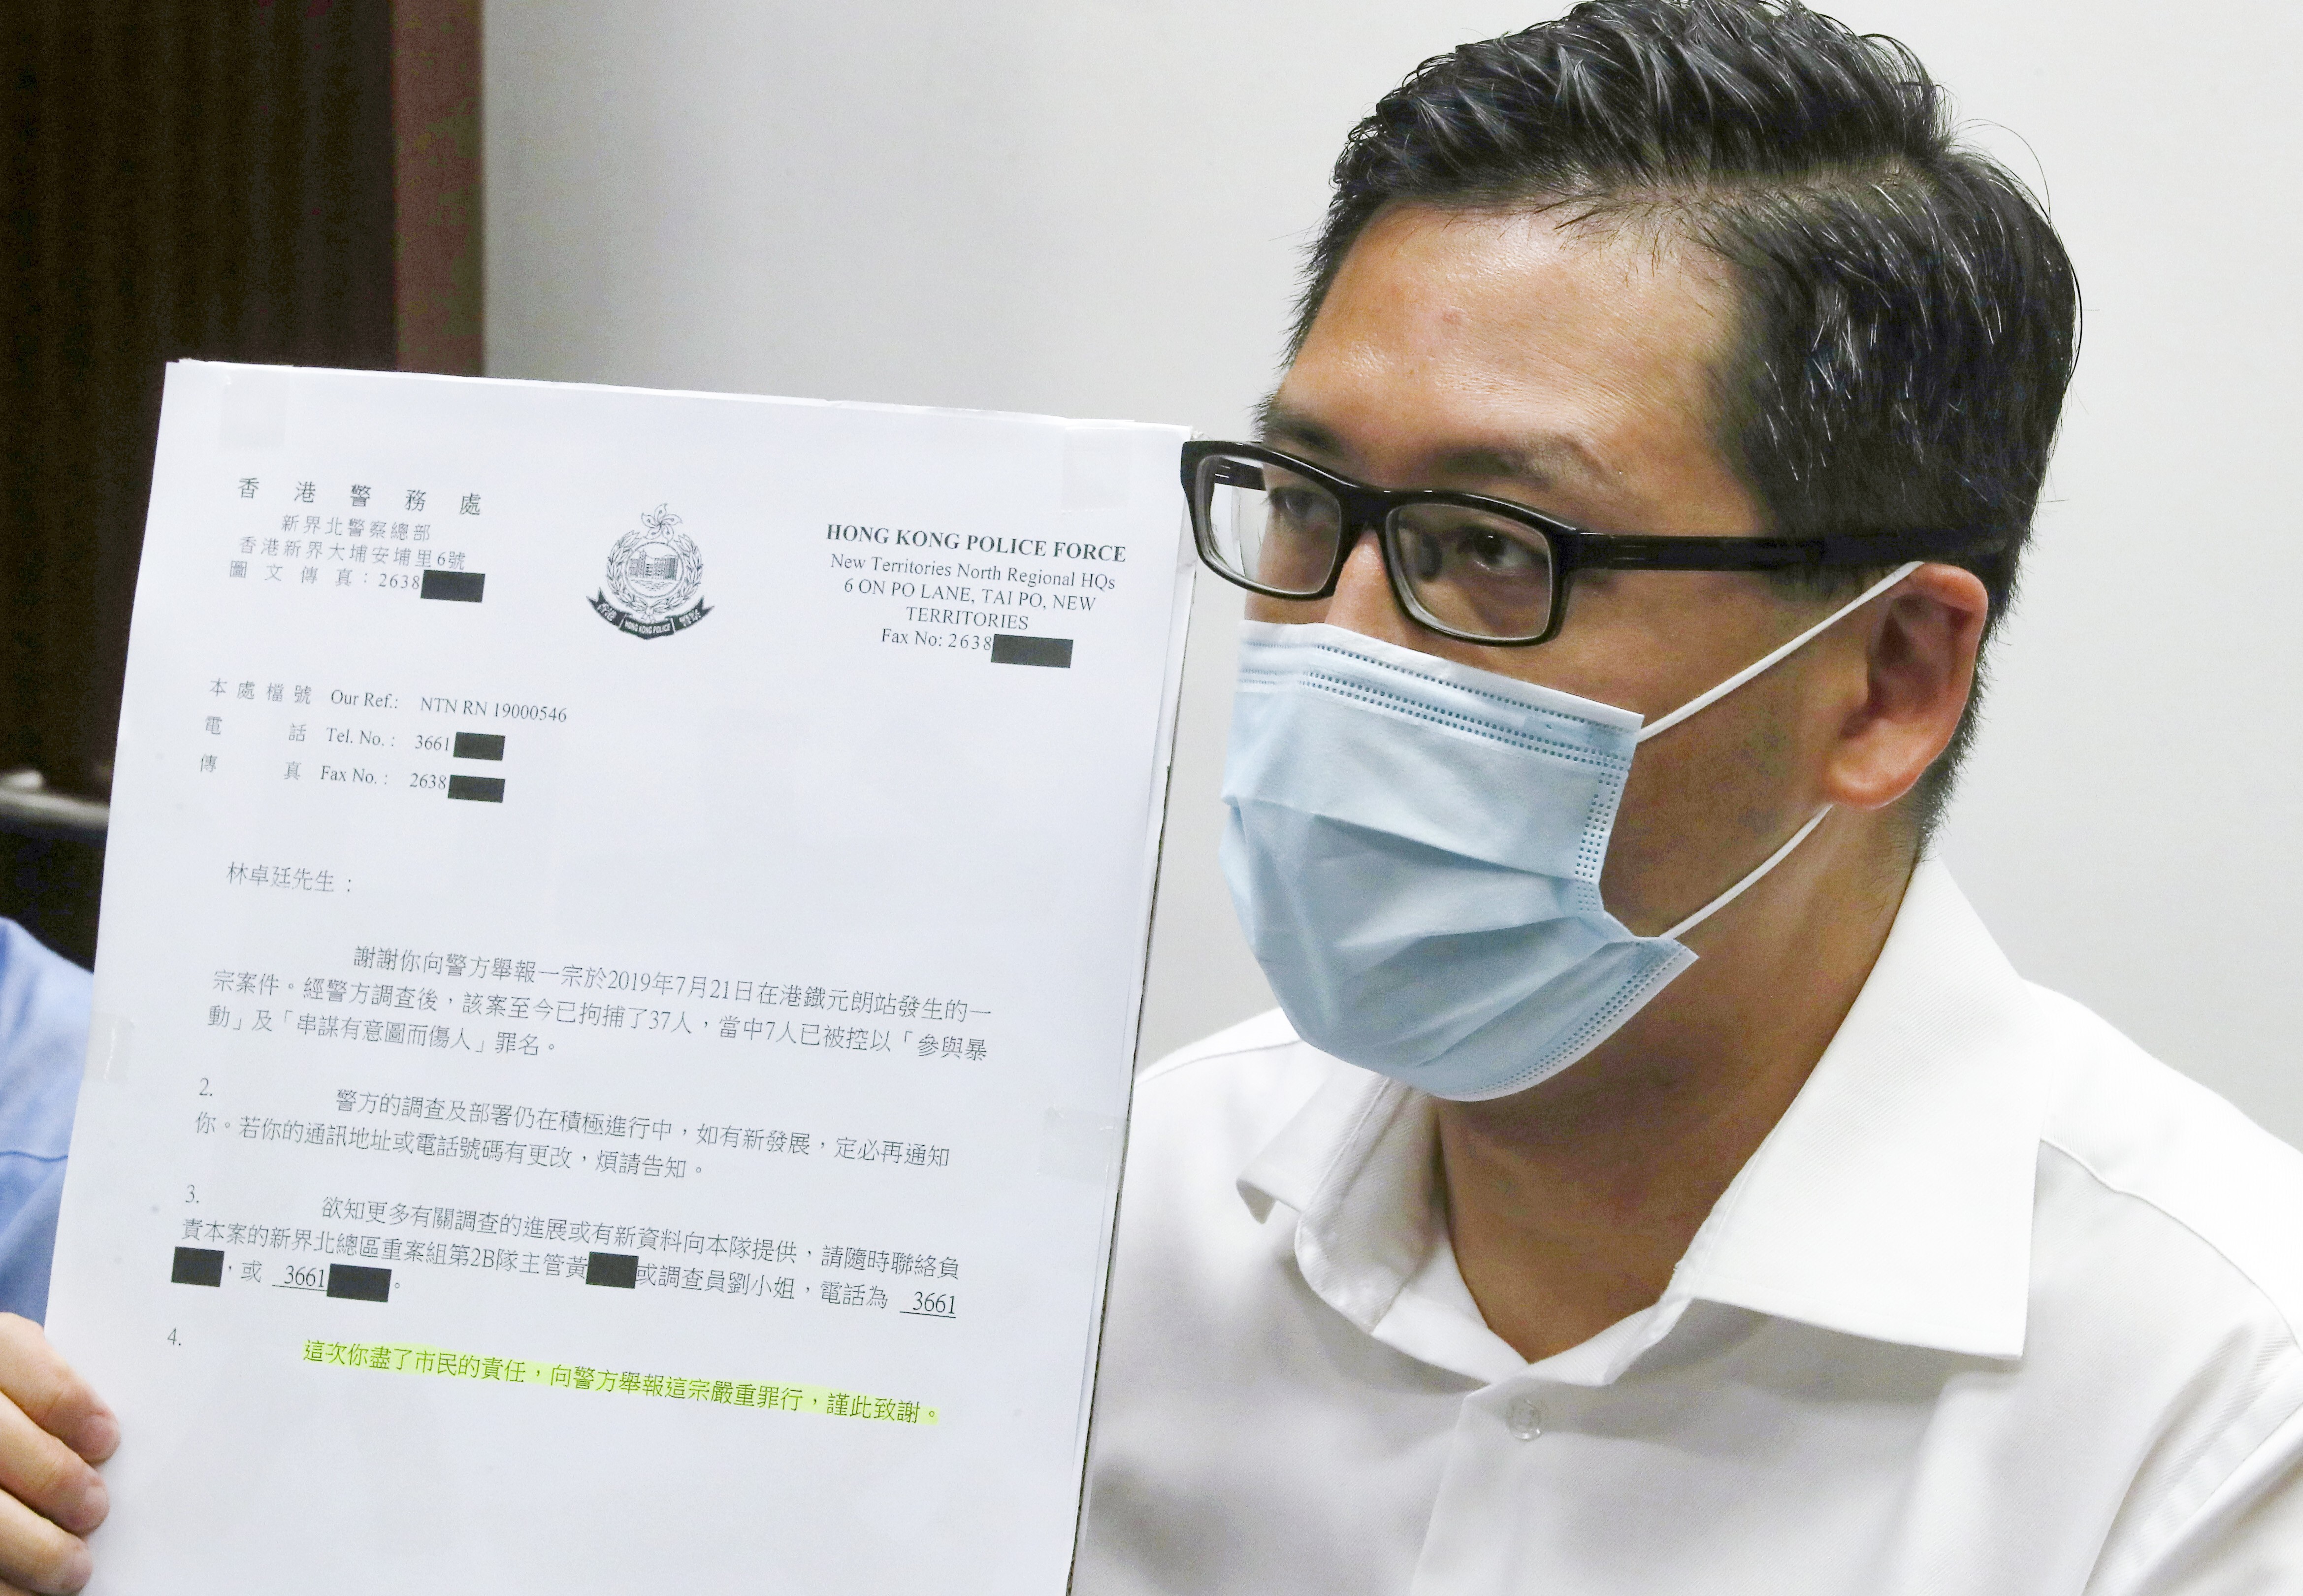 Democratic Party lawmaker Lam Cheuk-ting displays the letter he received from police thanking him for ‘fulfilling’ his responsibility in reporting the crime. Photo: Edmond So